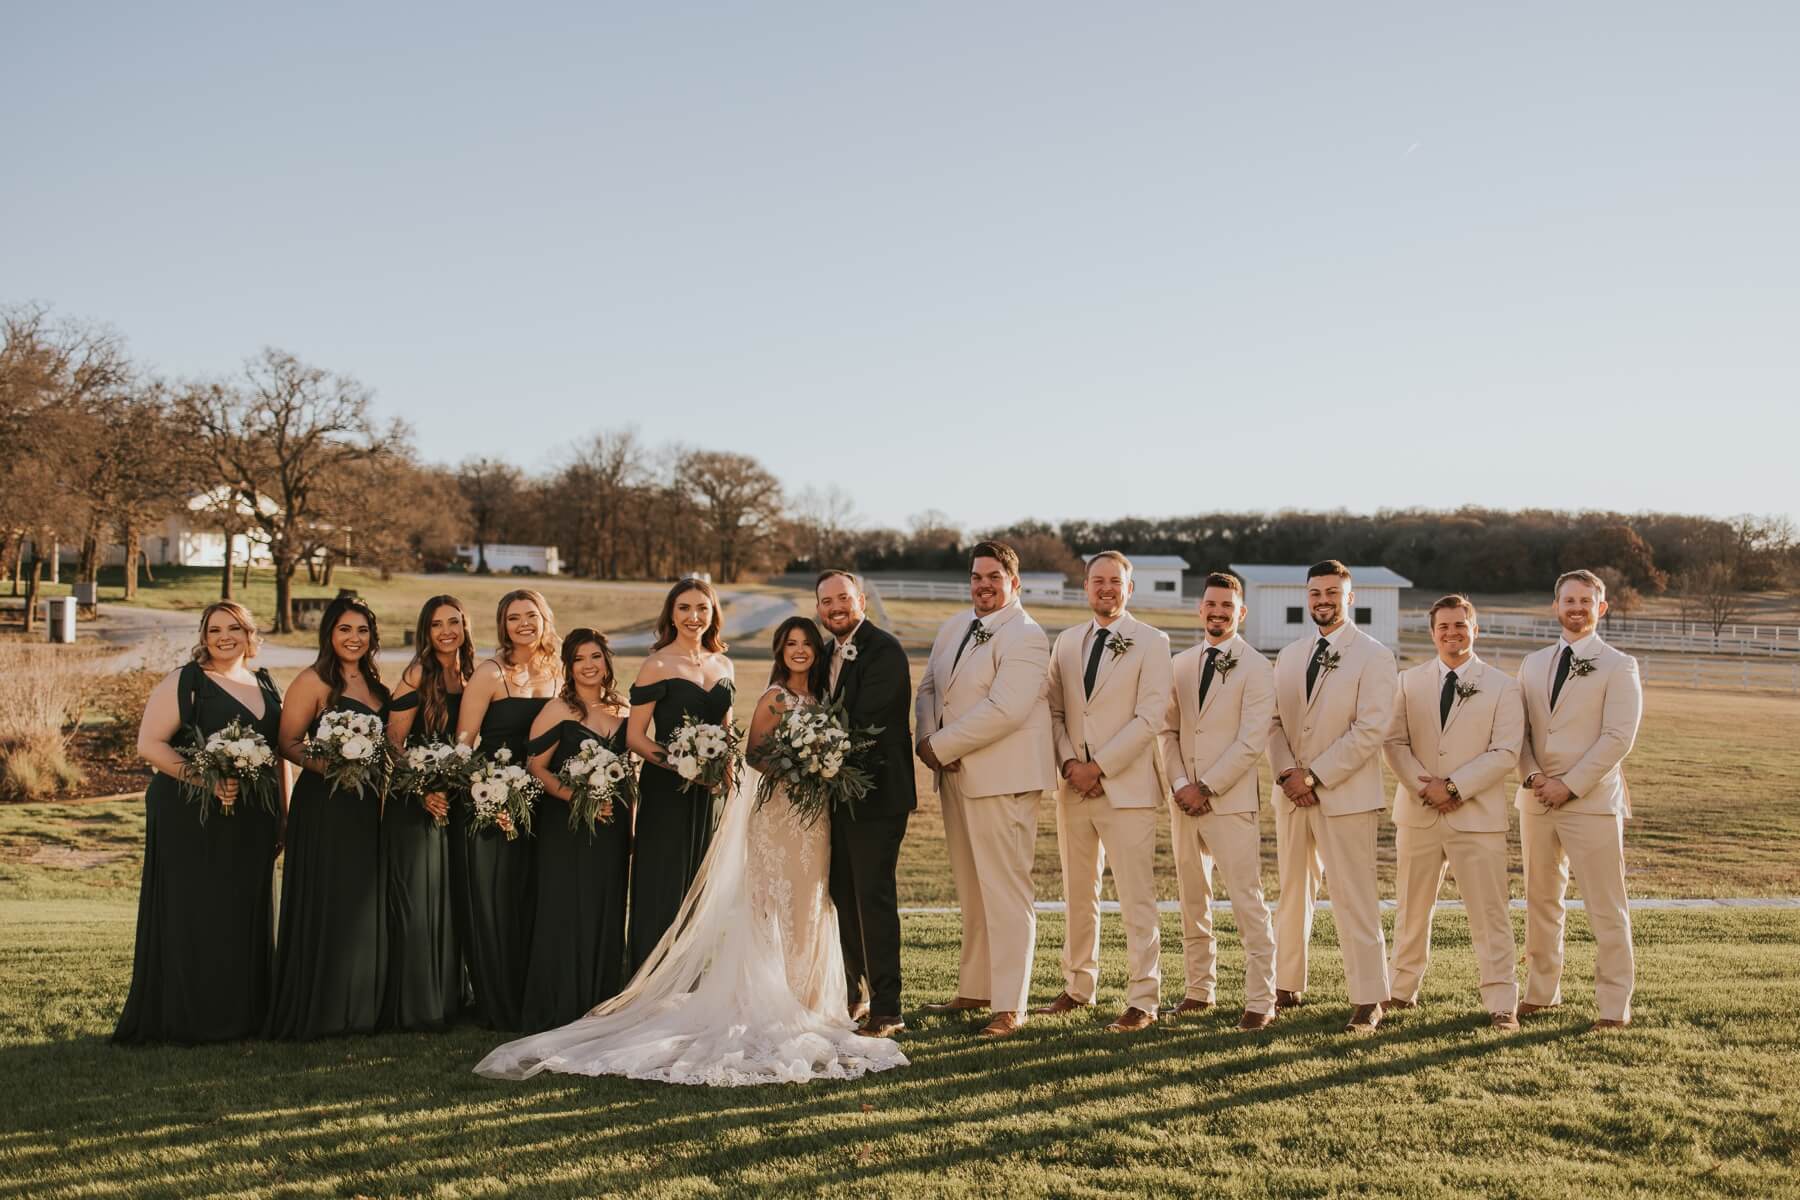 Bride and groom with wedding party in open field with florals designed by Edwards Floral Design in post about wedding florists in Dallas